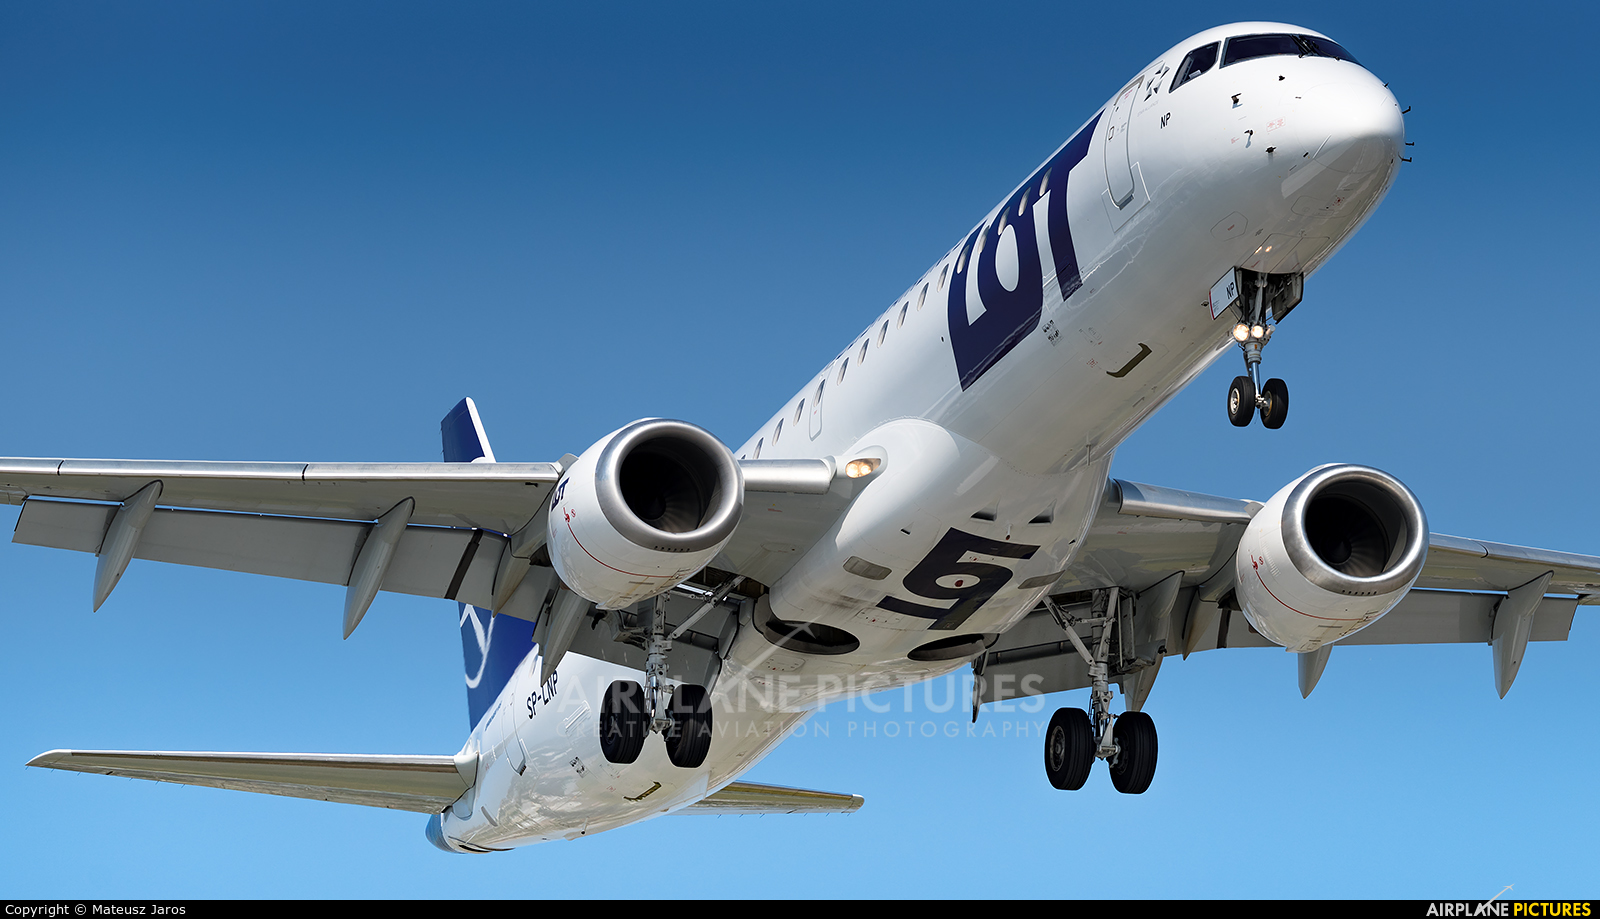 LOT - Polish Airlines SP-LNP aircraft at Warsaw - Frederic Chopin